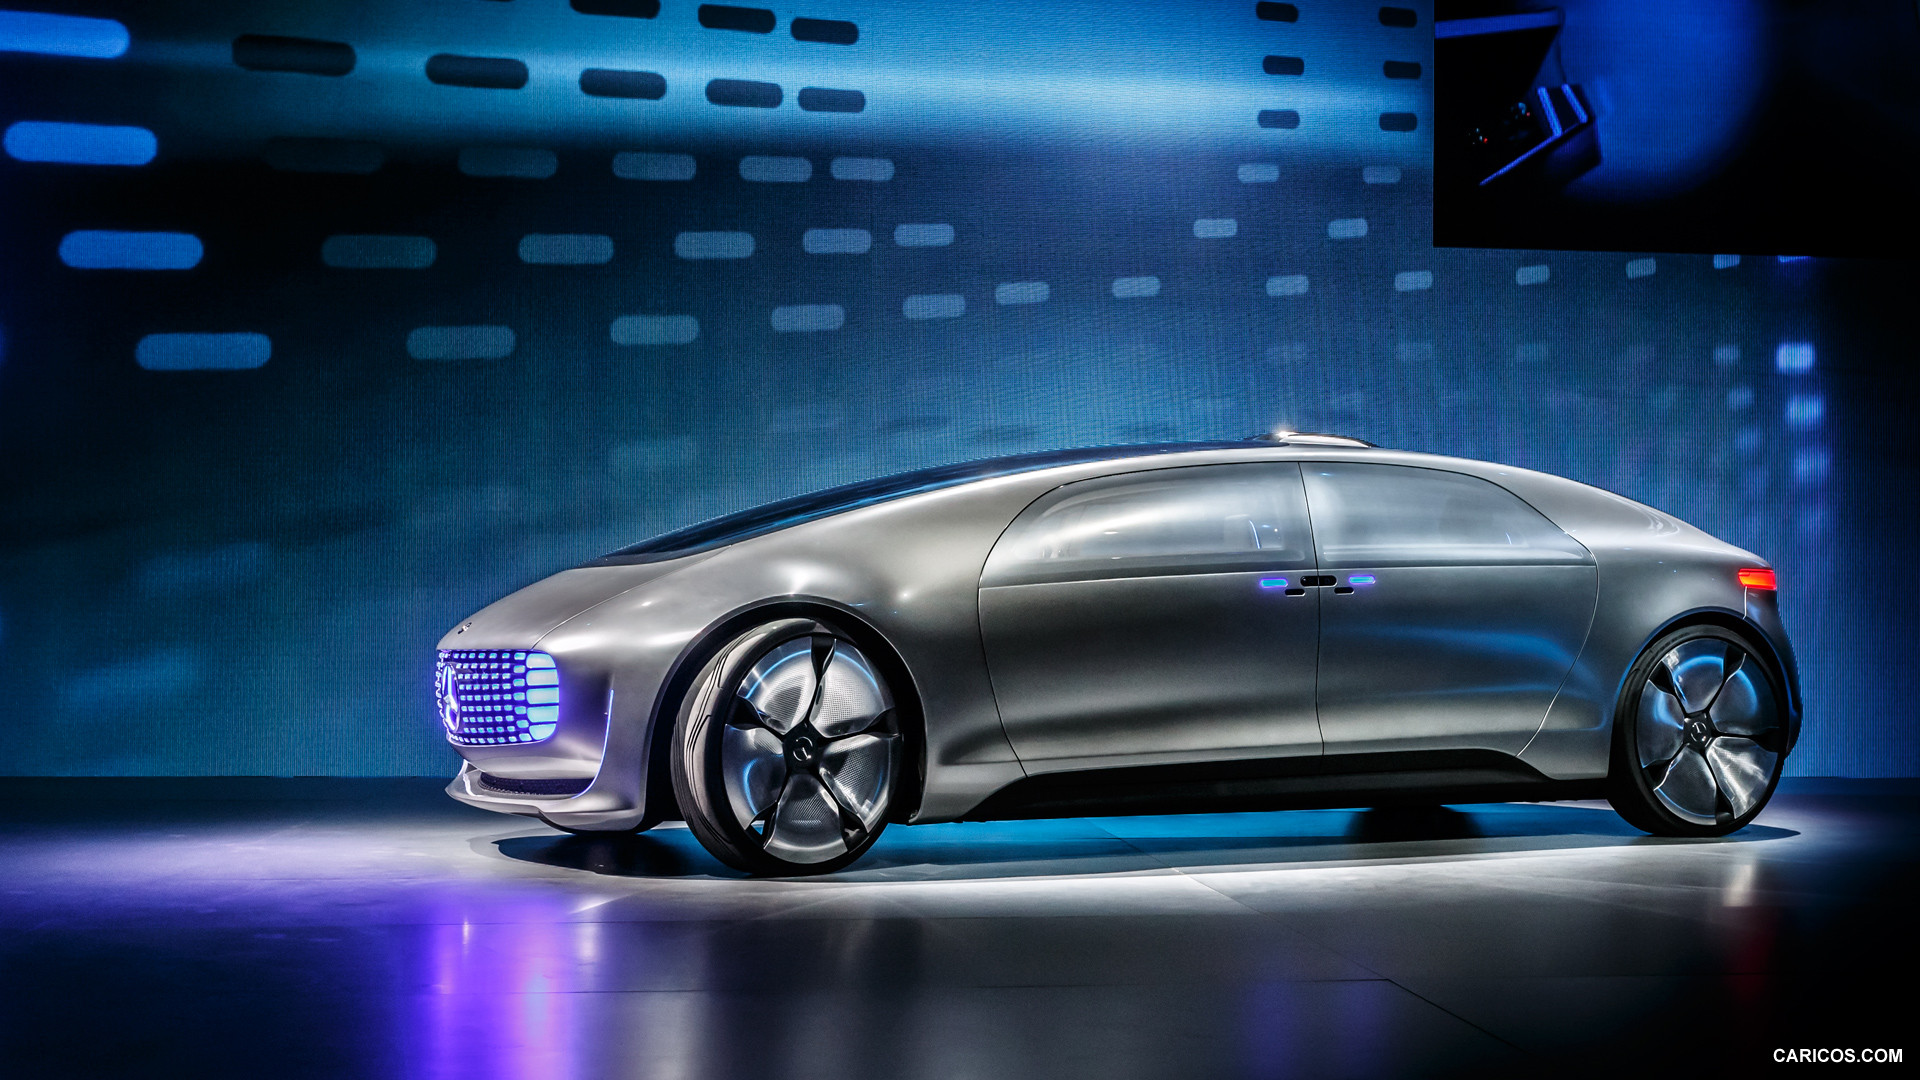 2015 Mercedes-Benz F 015 Luxury in Motion Concept at CES - Side, #85 of 92